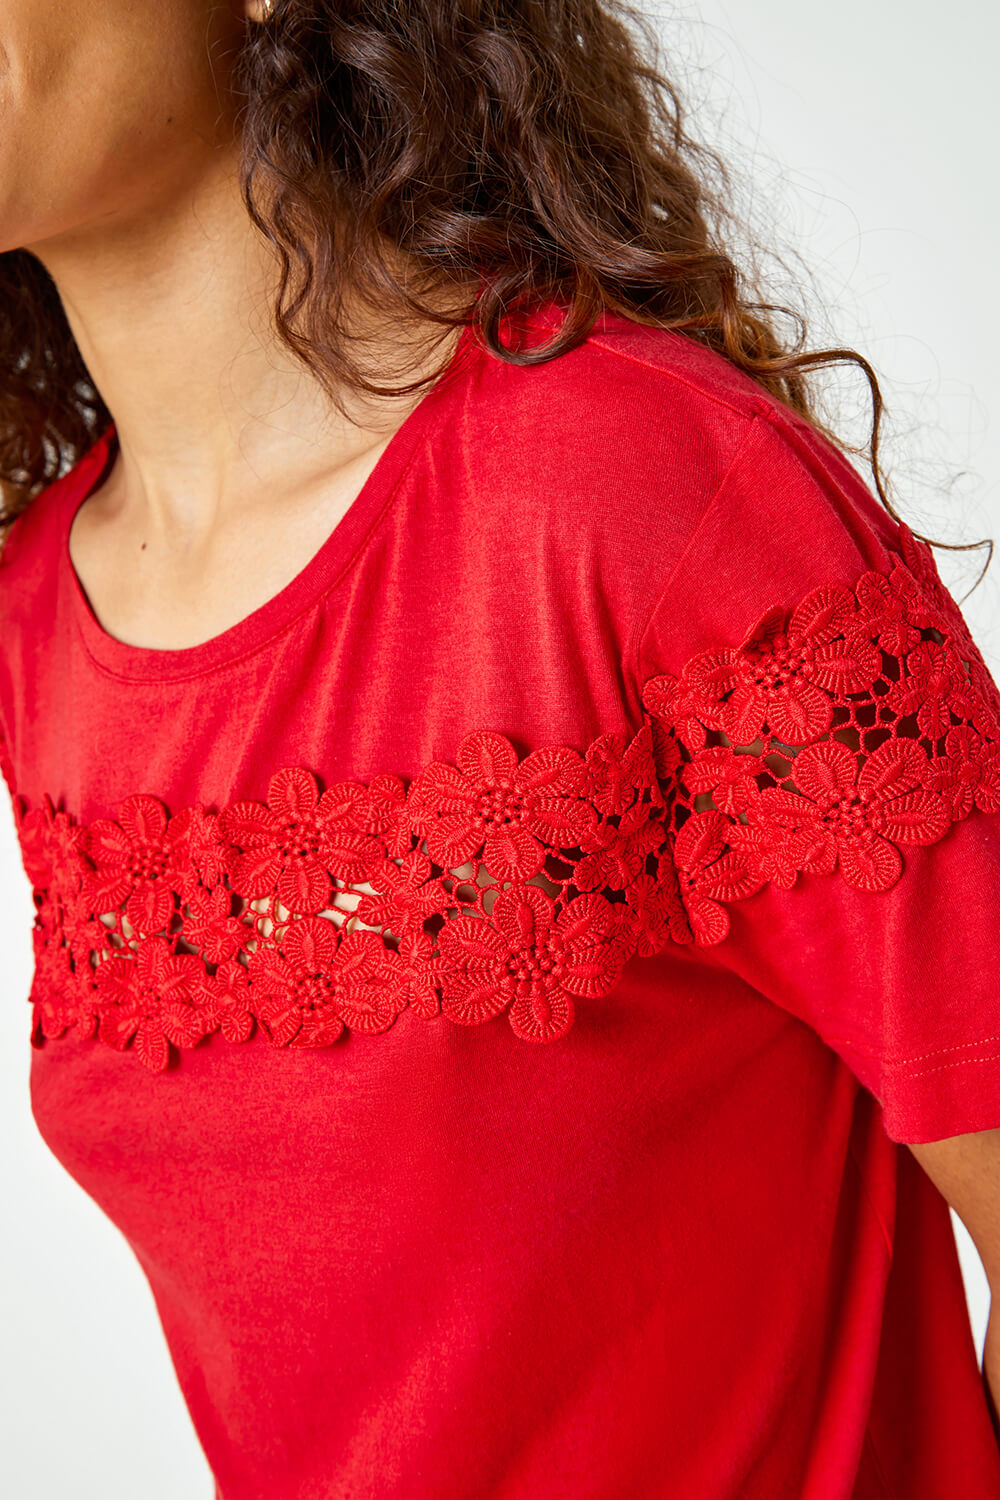 Red Lace Detail Jersey T-Shirt, Image 6 of 6